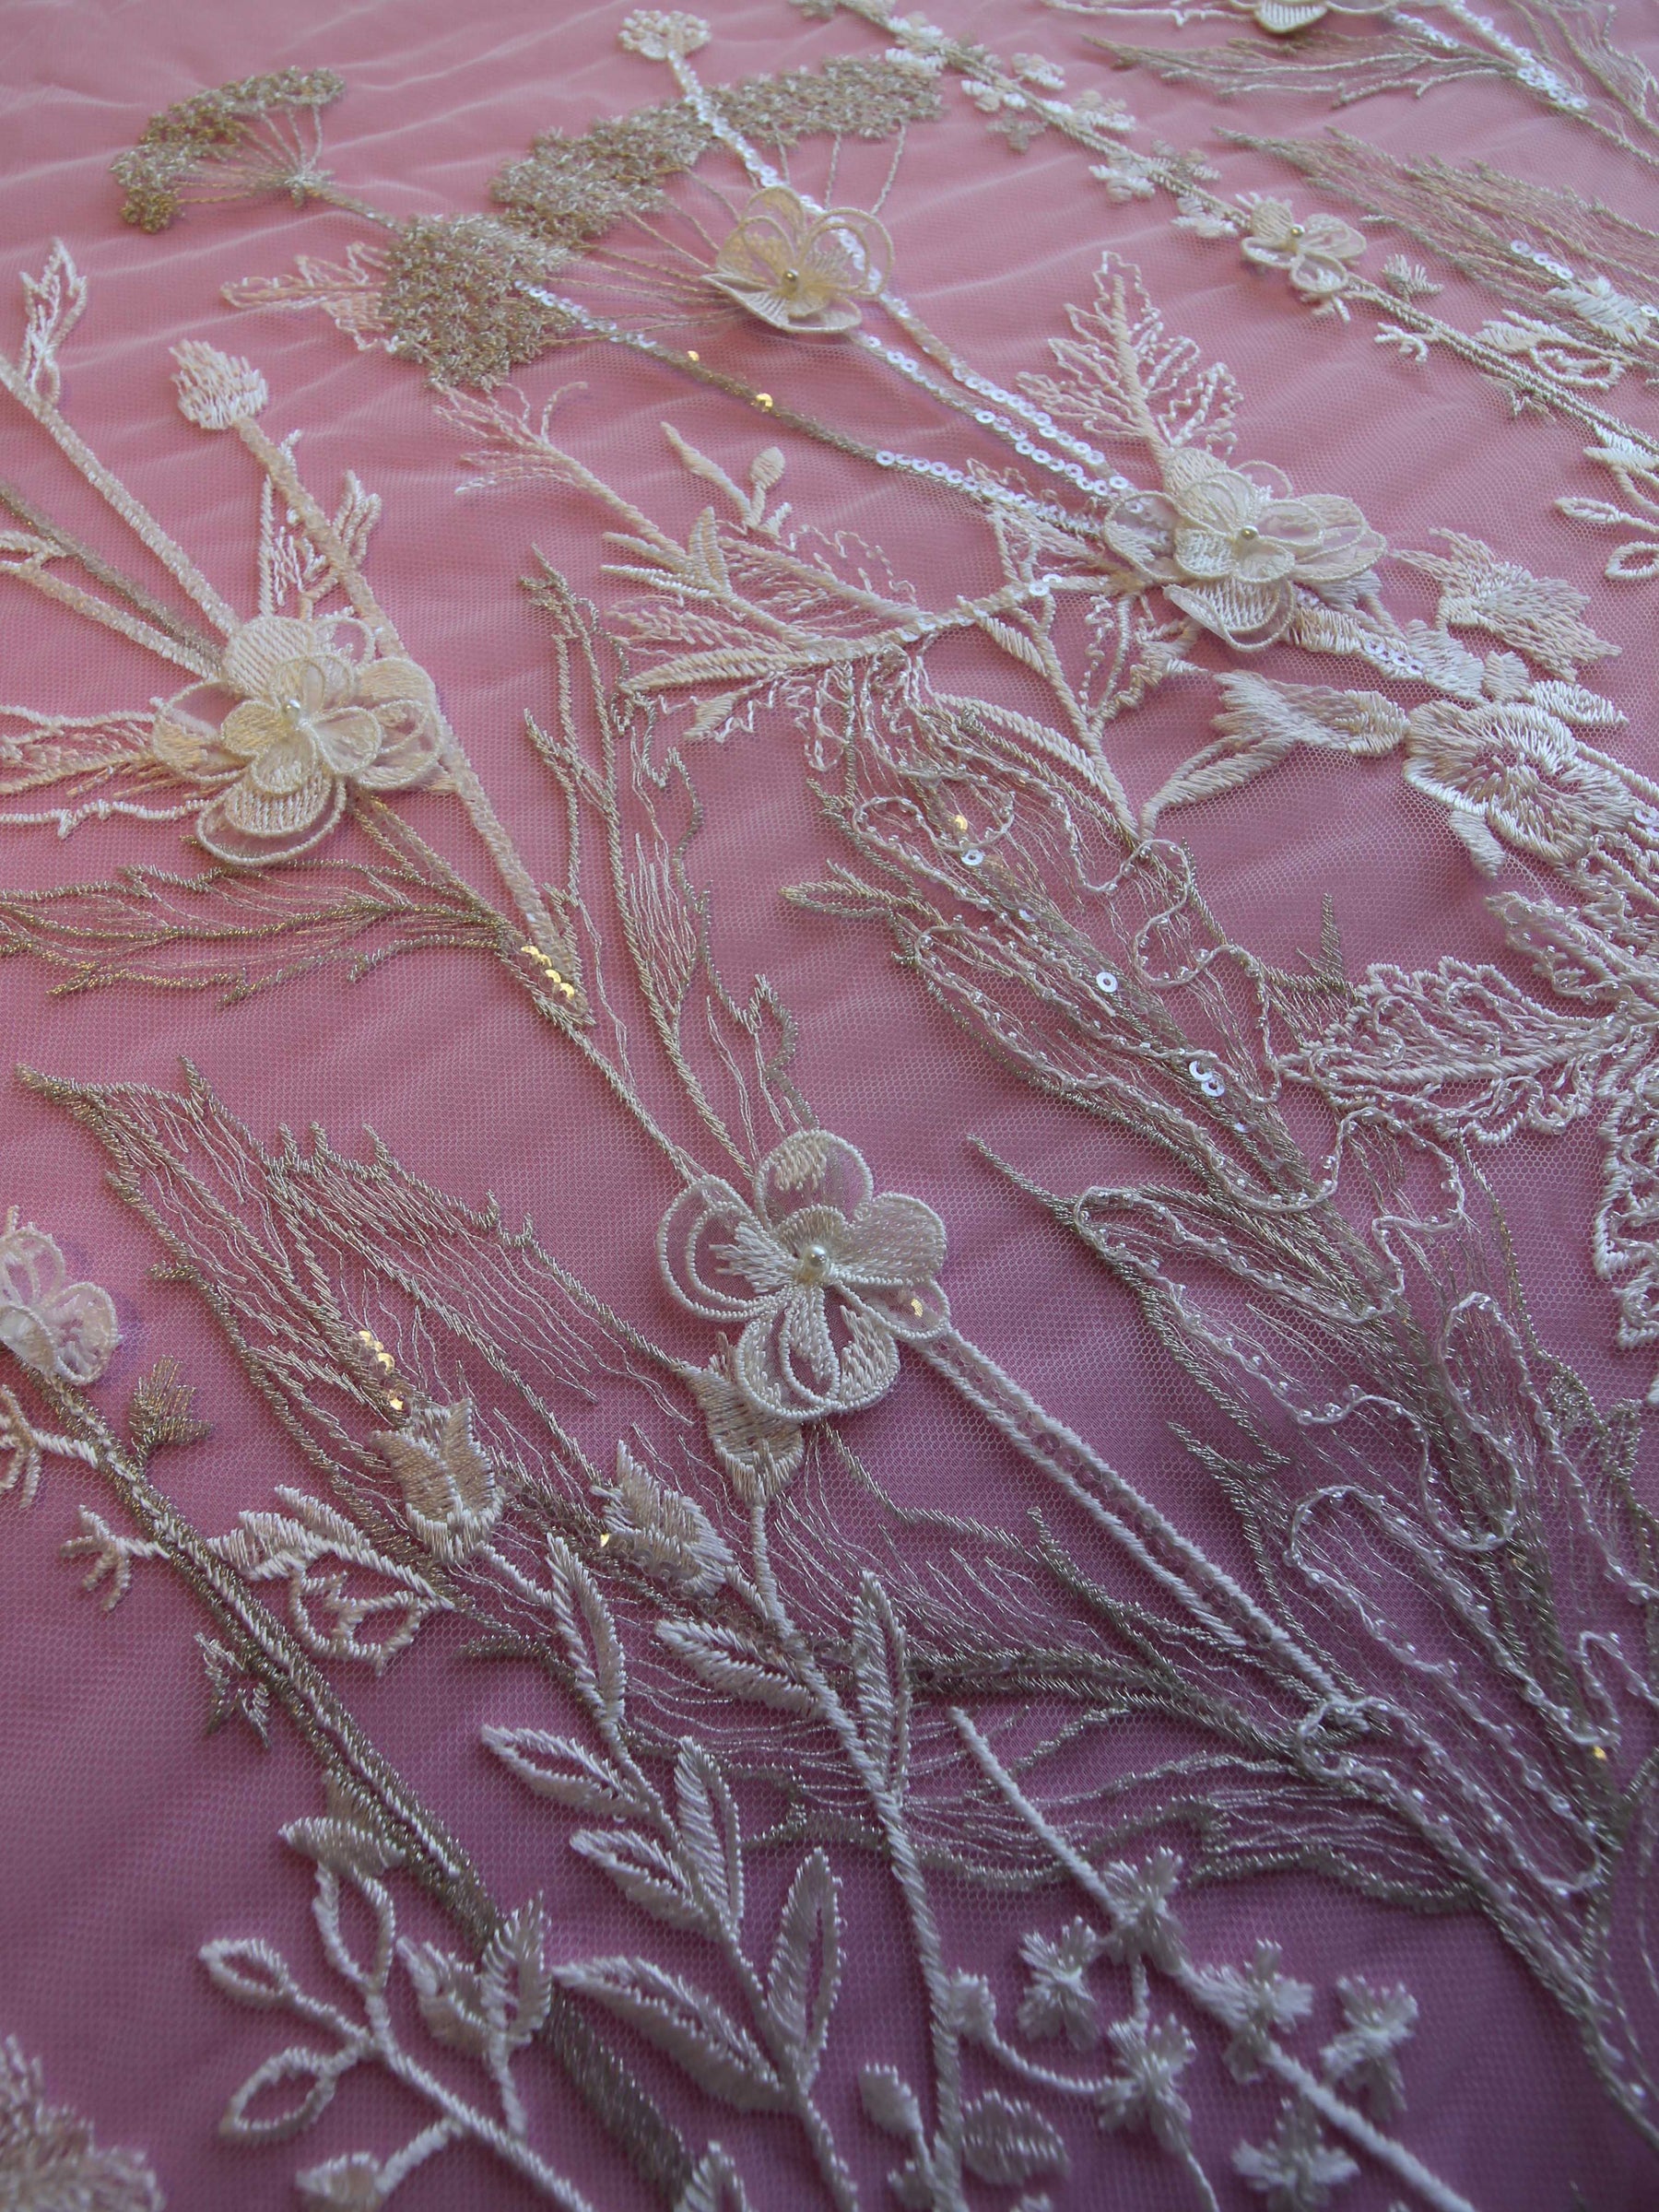 Ivory Embroidered Lace - Garbina